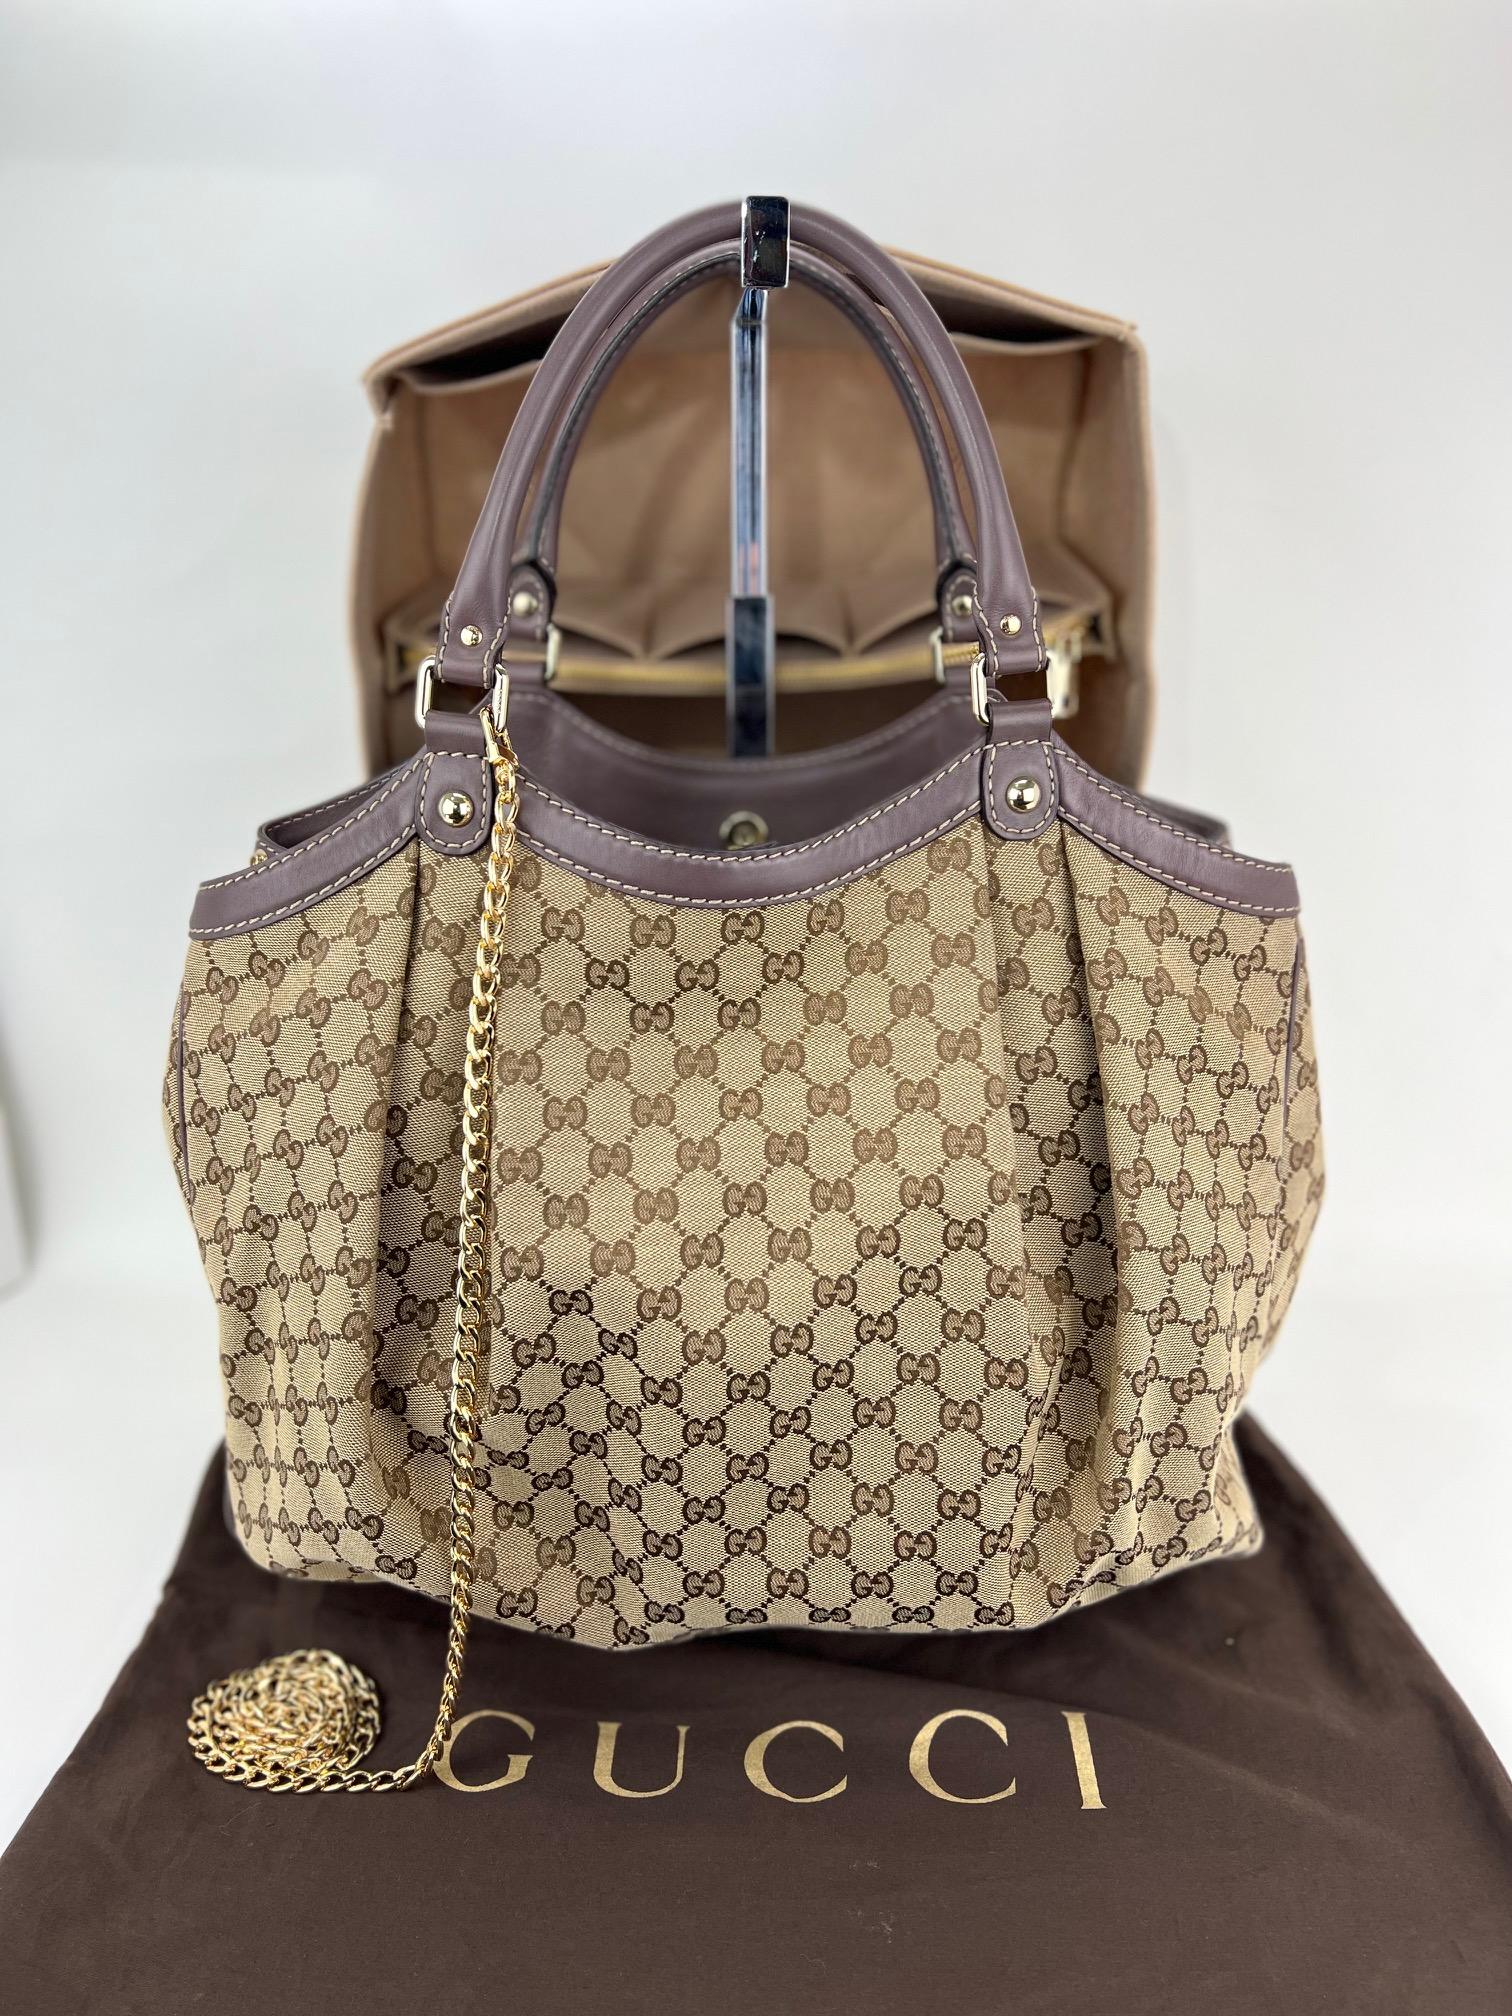 Pre-Owned 100% Authentic
Gucci Large Sukey GG Monogram Canvas Tote
W/Added Insert to help Organize and Keep Bag Upright
and Non Gucci Chain
RATING: B   very good, well maintained,
shows minor signs of wear
MATERIAL: GG monogram canvas and leather